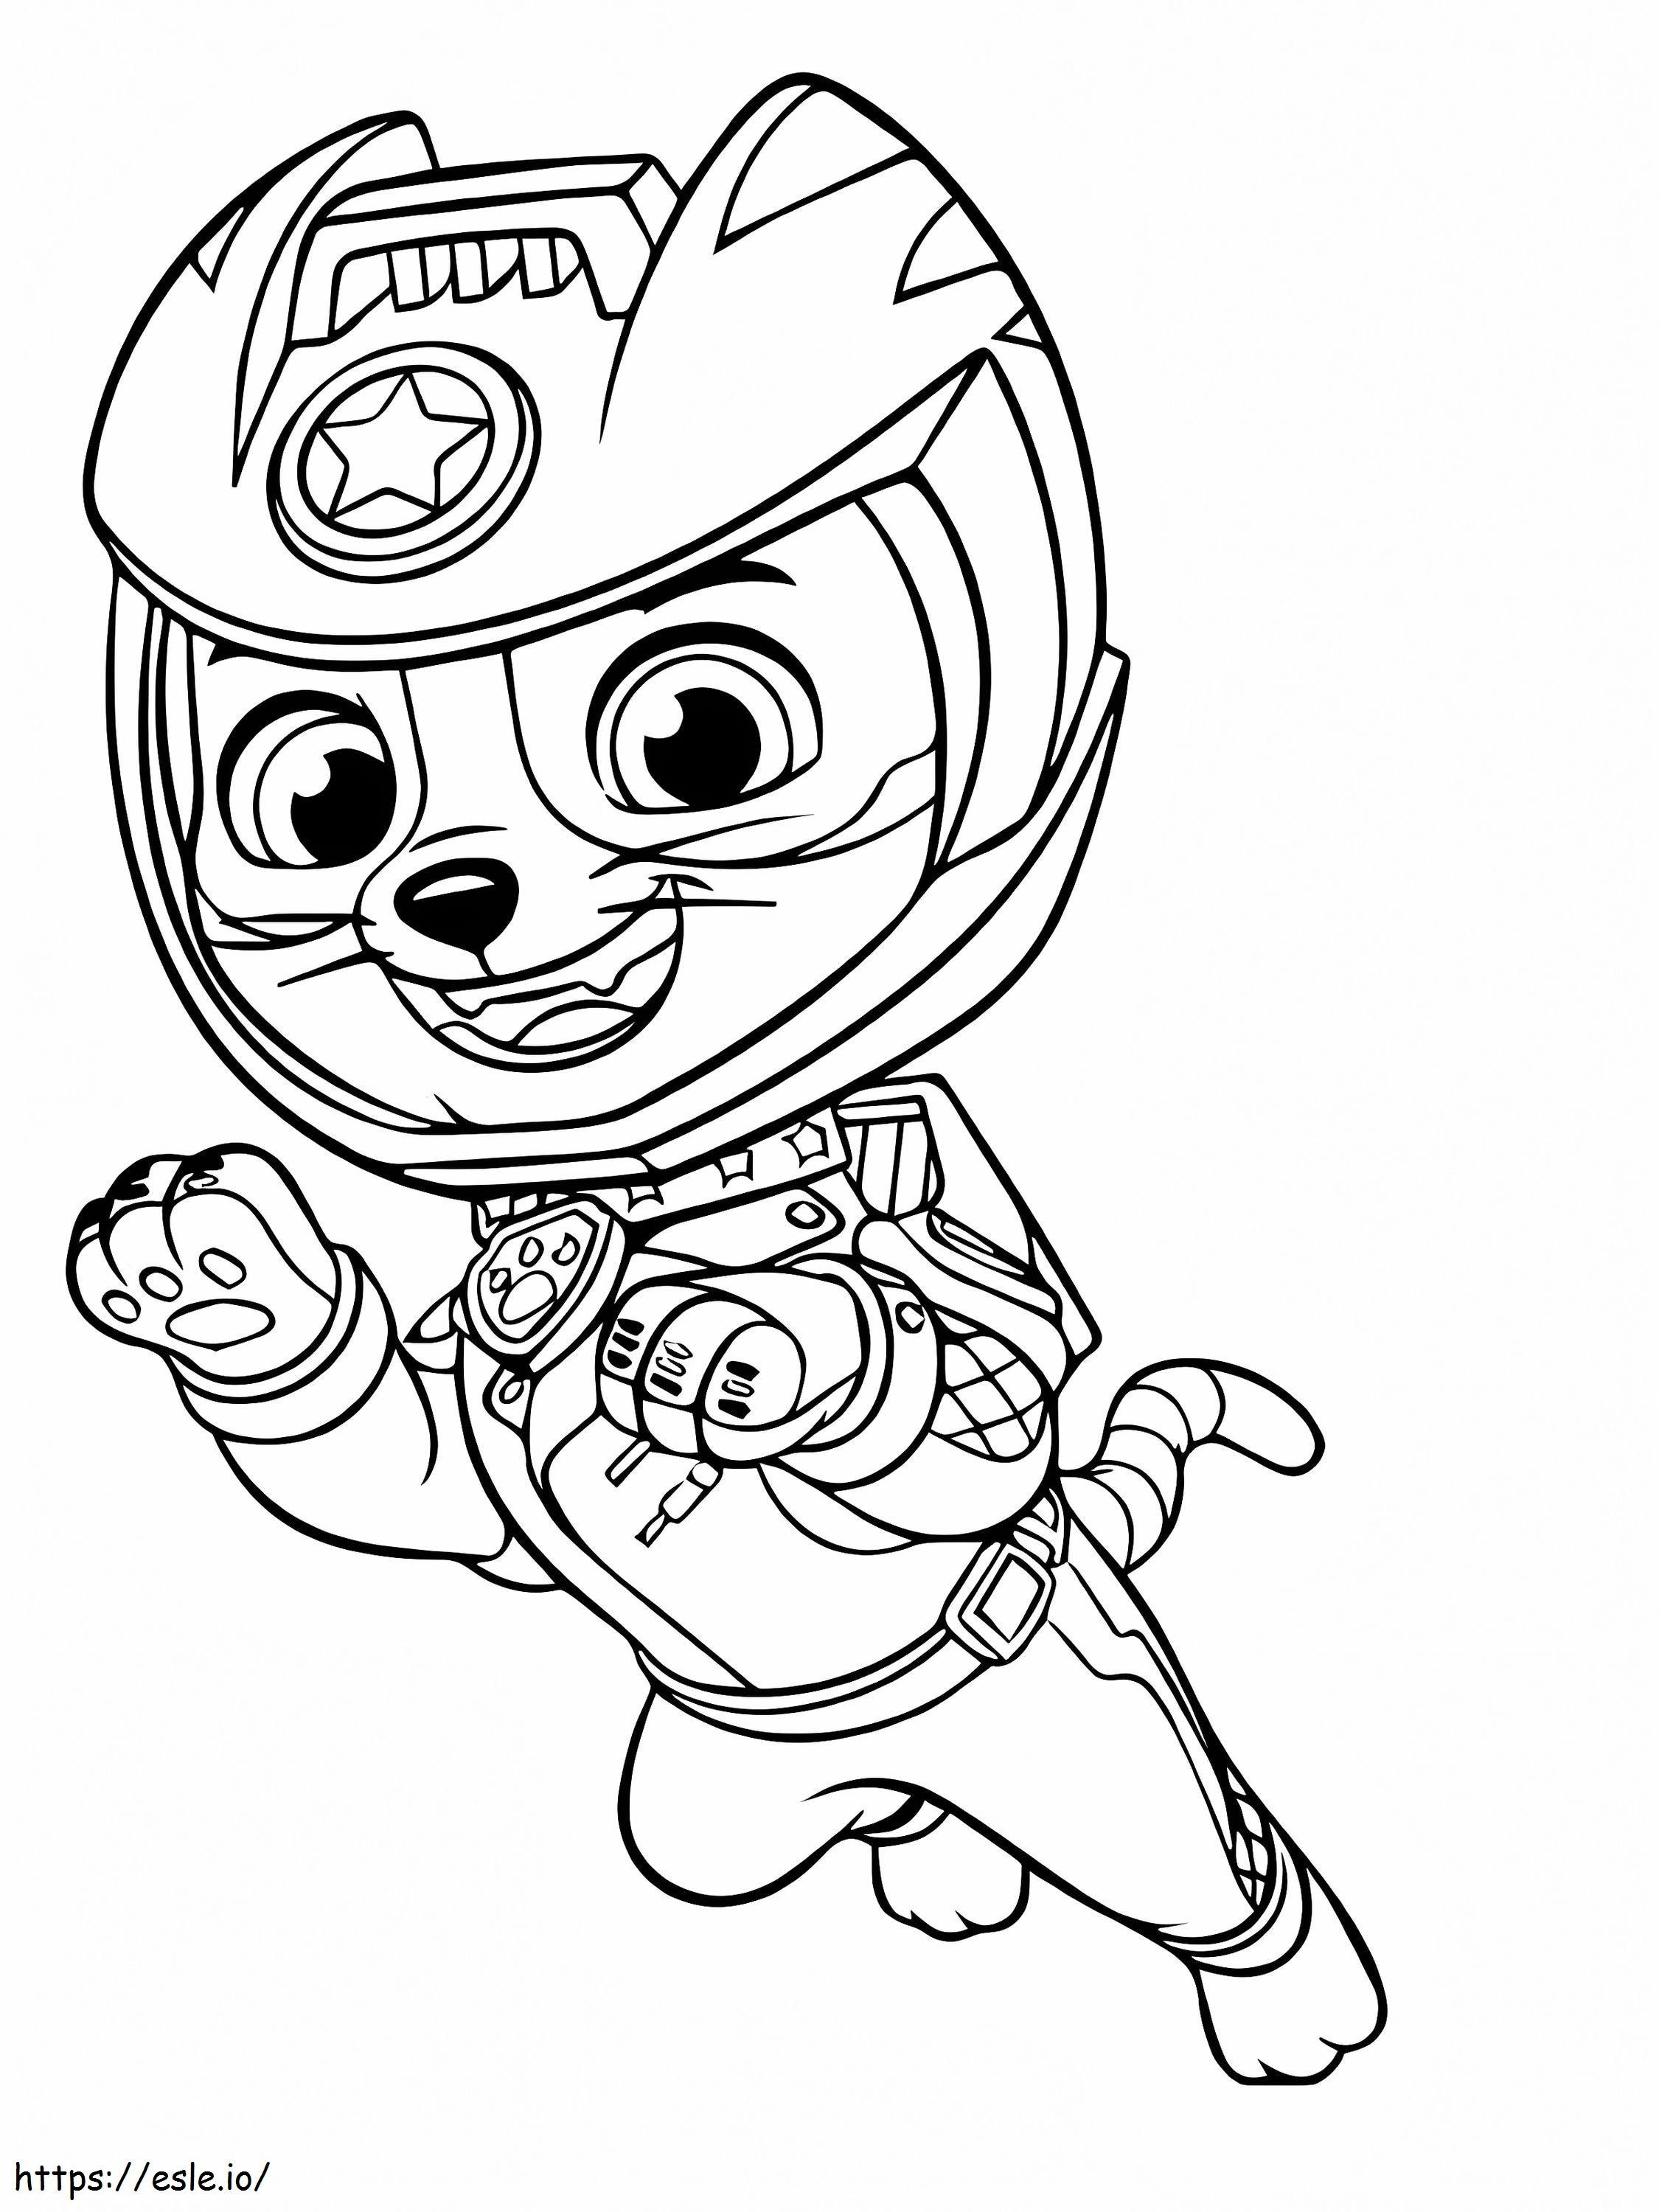 Wild Cat From Paw Patrol Moto Pups coloring page